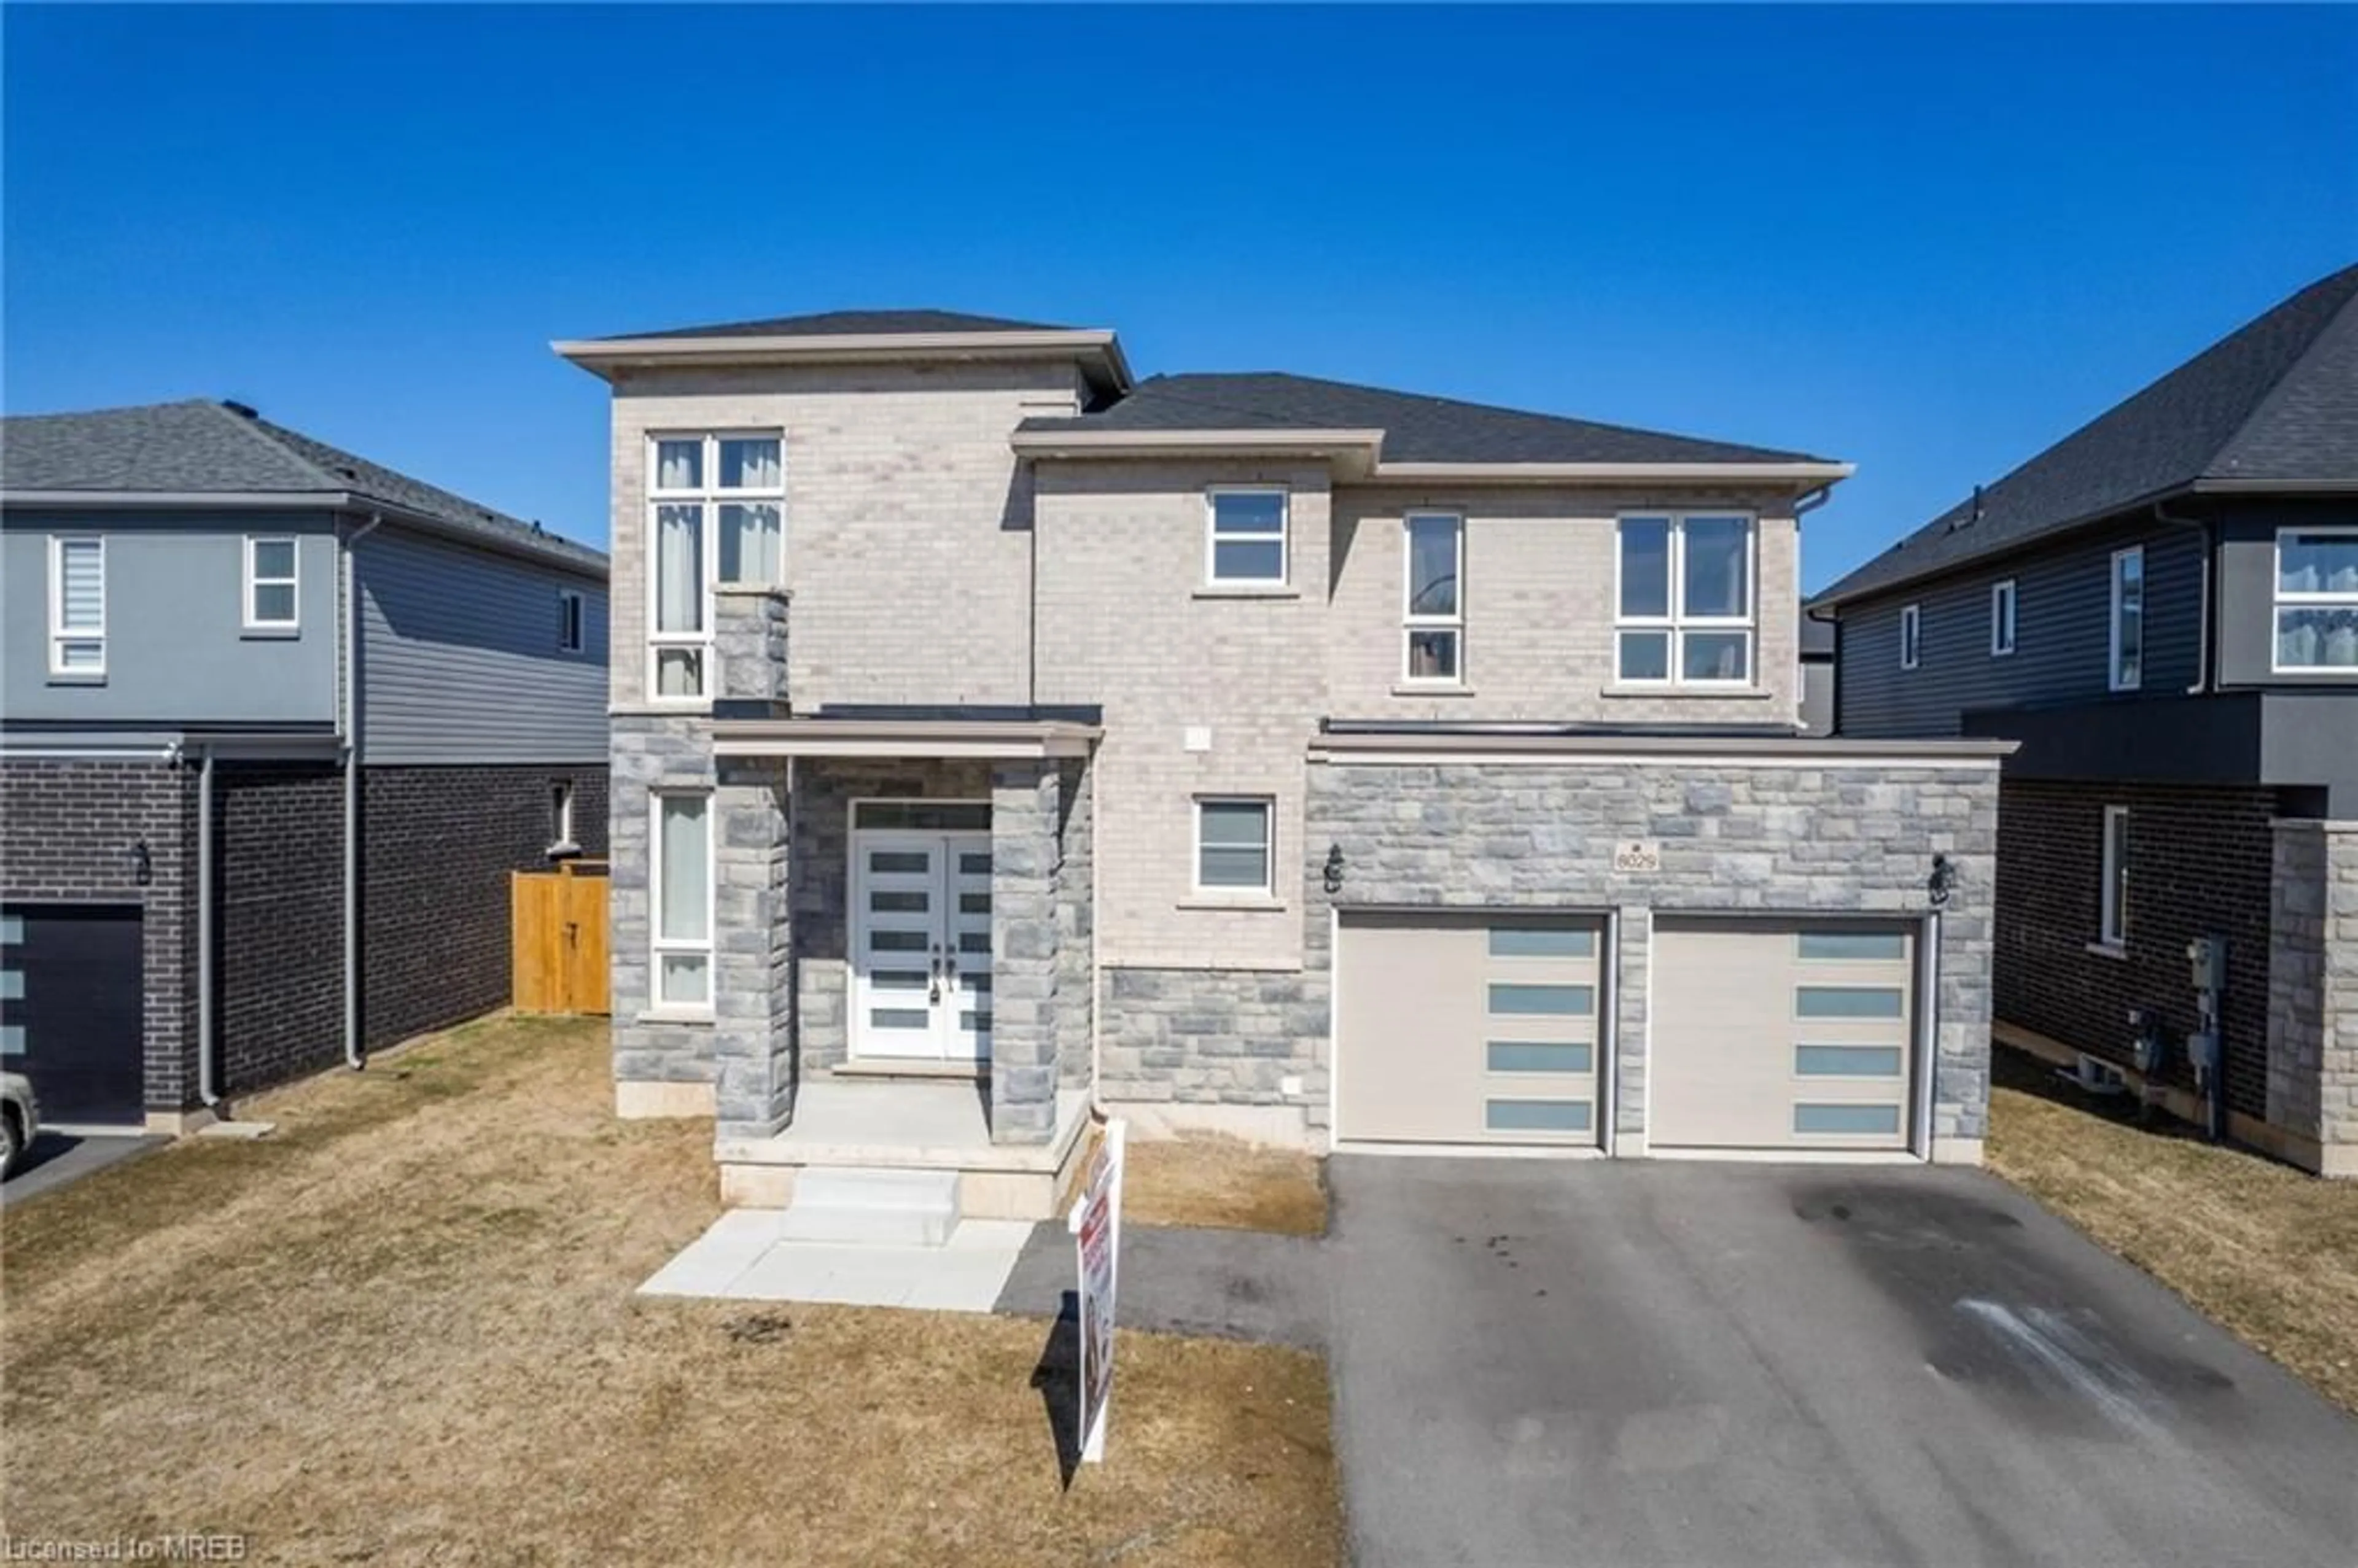 Home with stone exterior material for 8029 Brookside Dr, Niagara Falls Ontario L2H 3T9